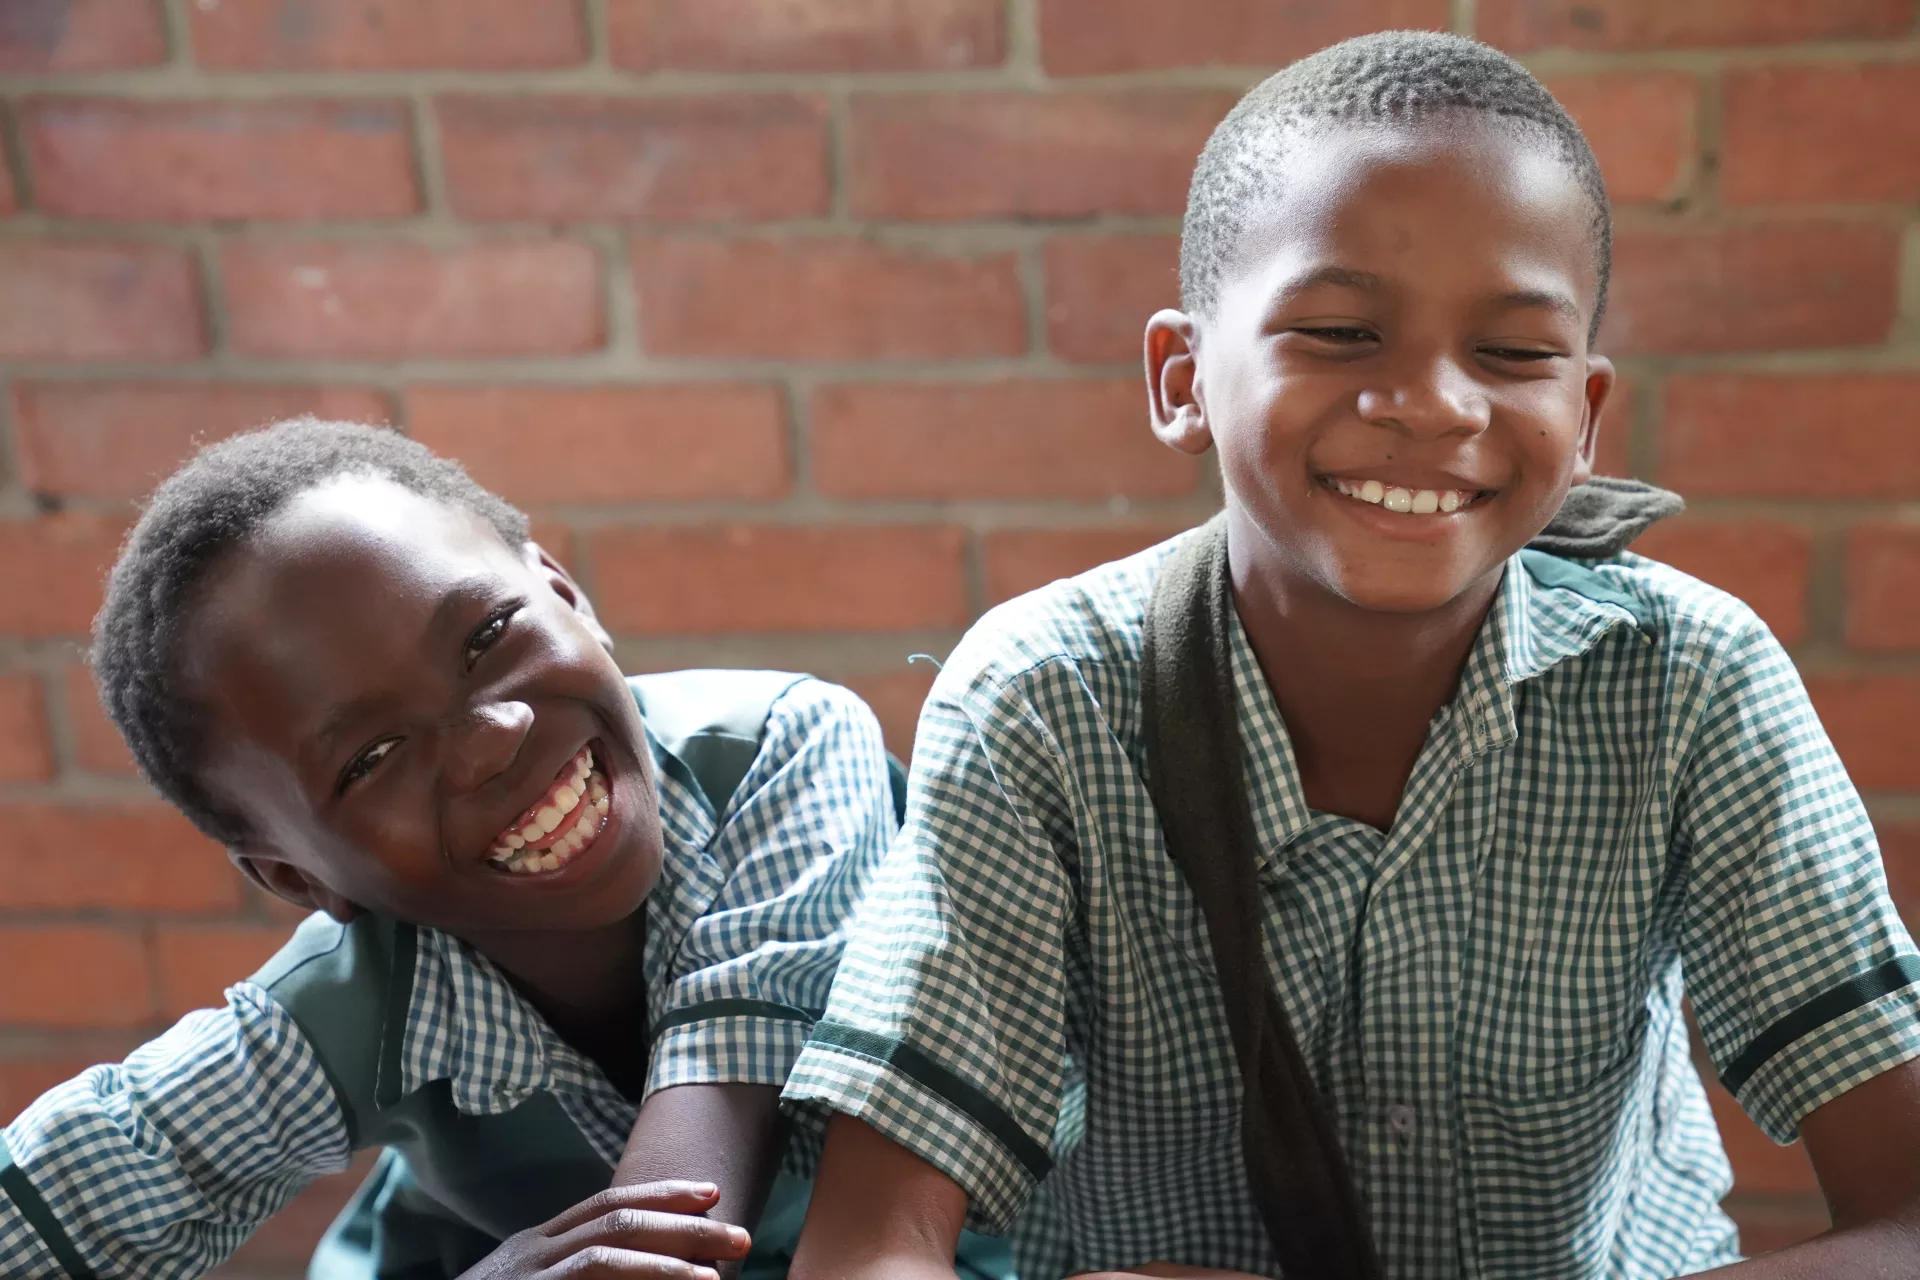 Two smiling boys at school in Zambia